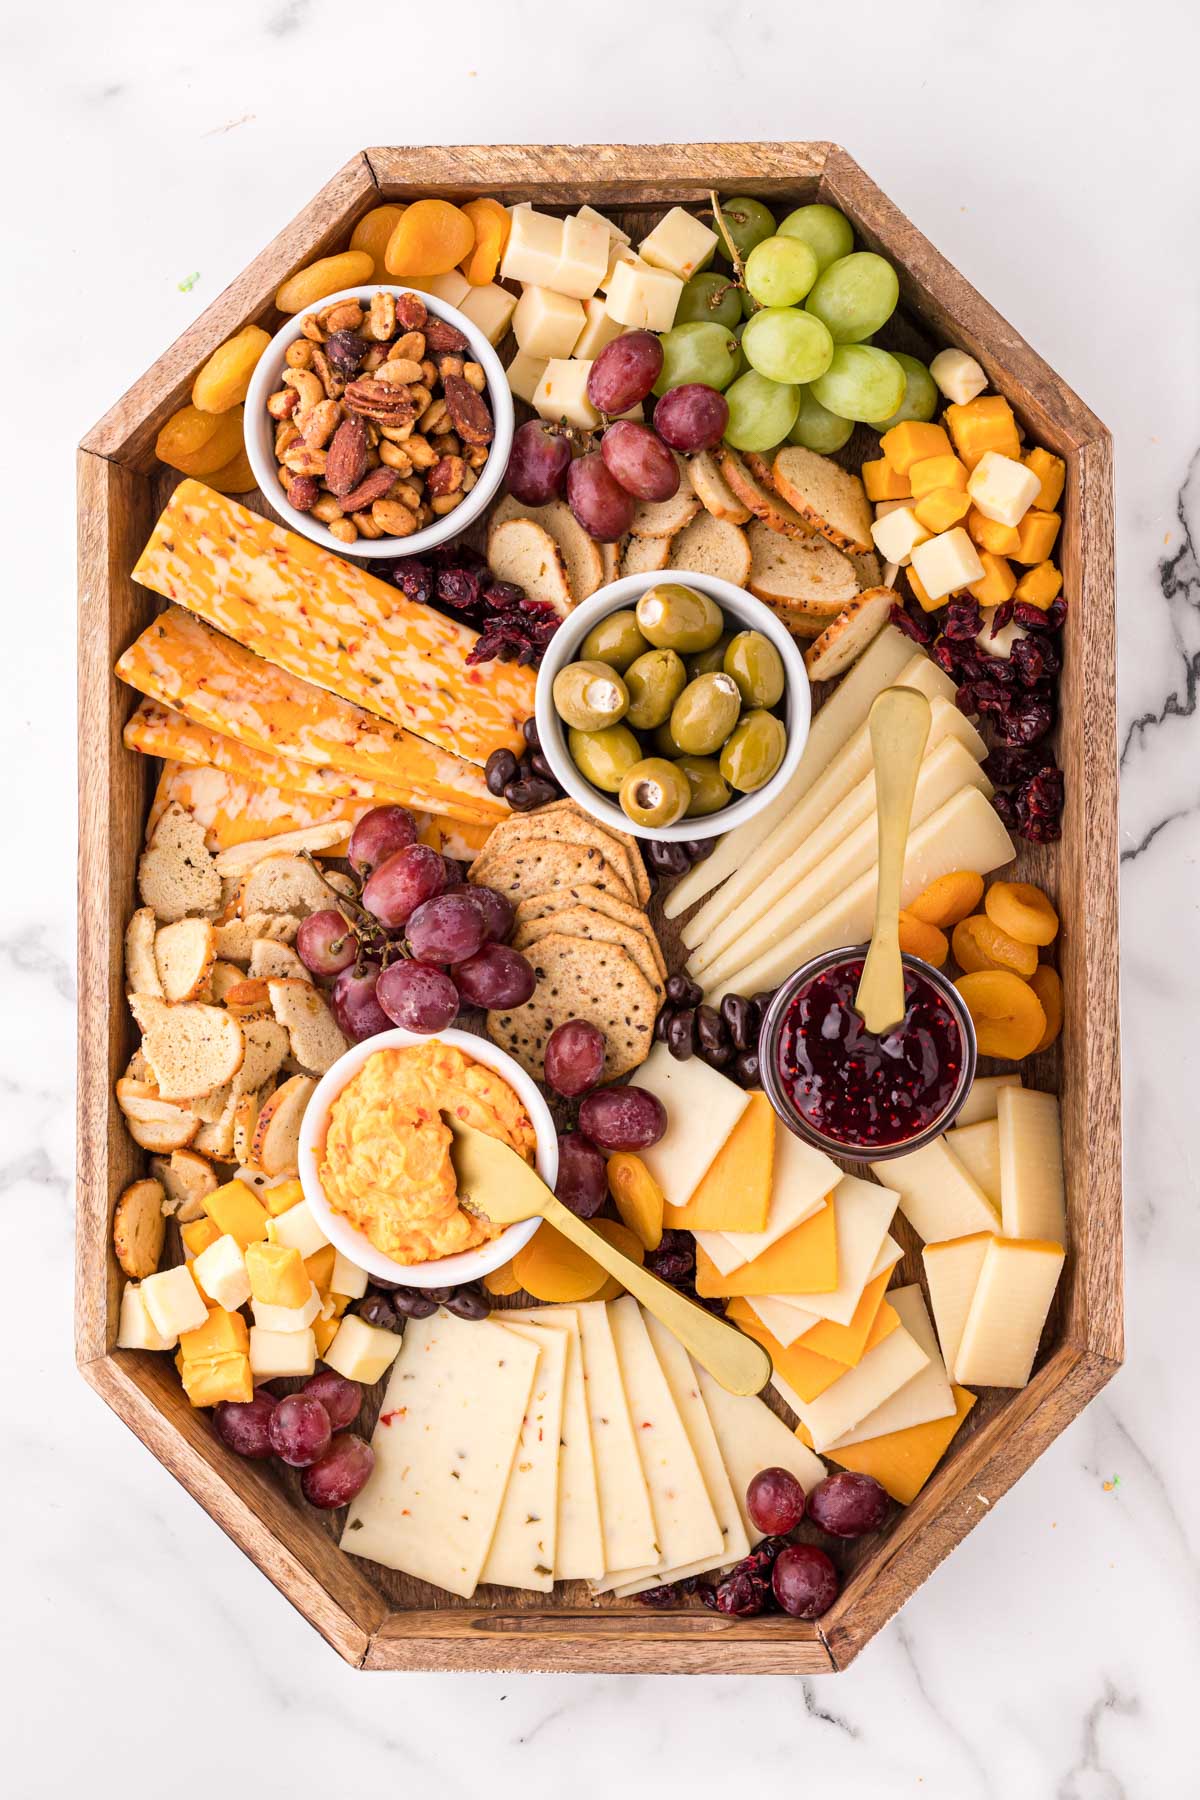 a cheese board with cheeses, fruits, nuts and spreads